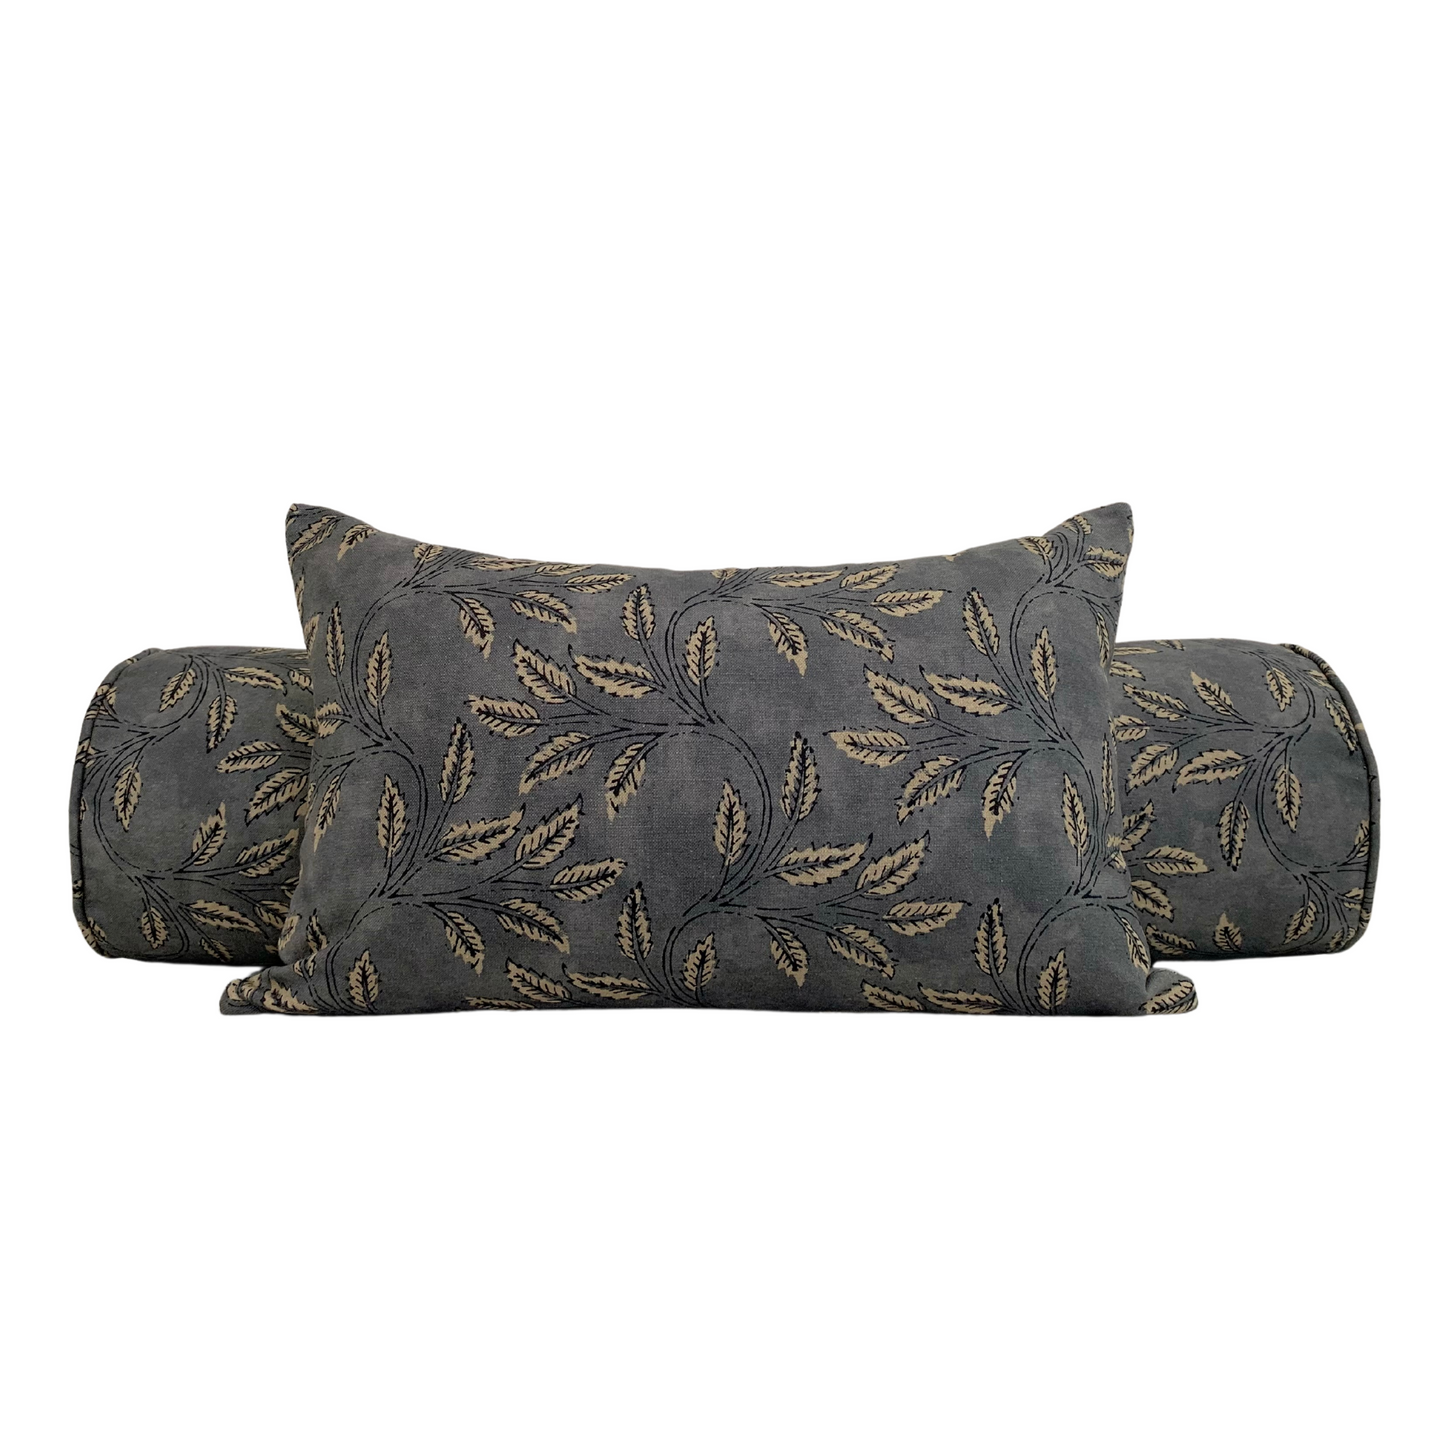 Botanical Foliage Pillow Cover in Charcoal | Organic Modern Decor | Block Print Inspired | Available in Lumbar, Bolster, Throw, Euro Sham Sizes